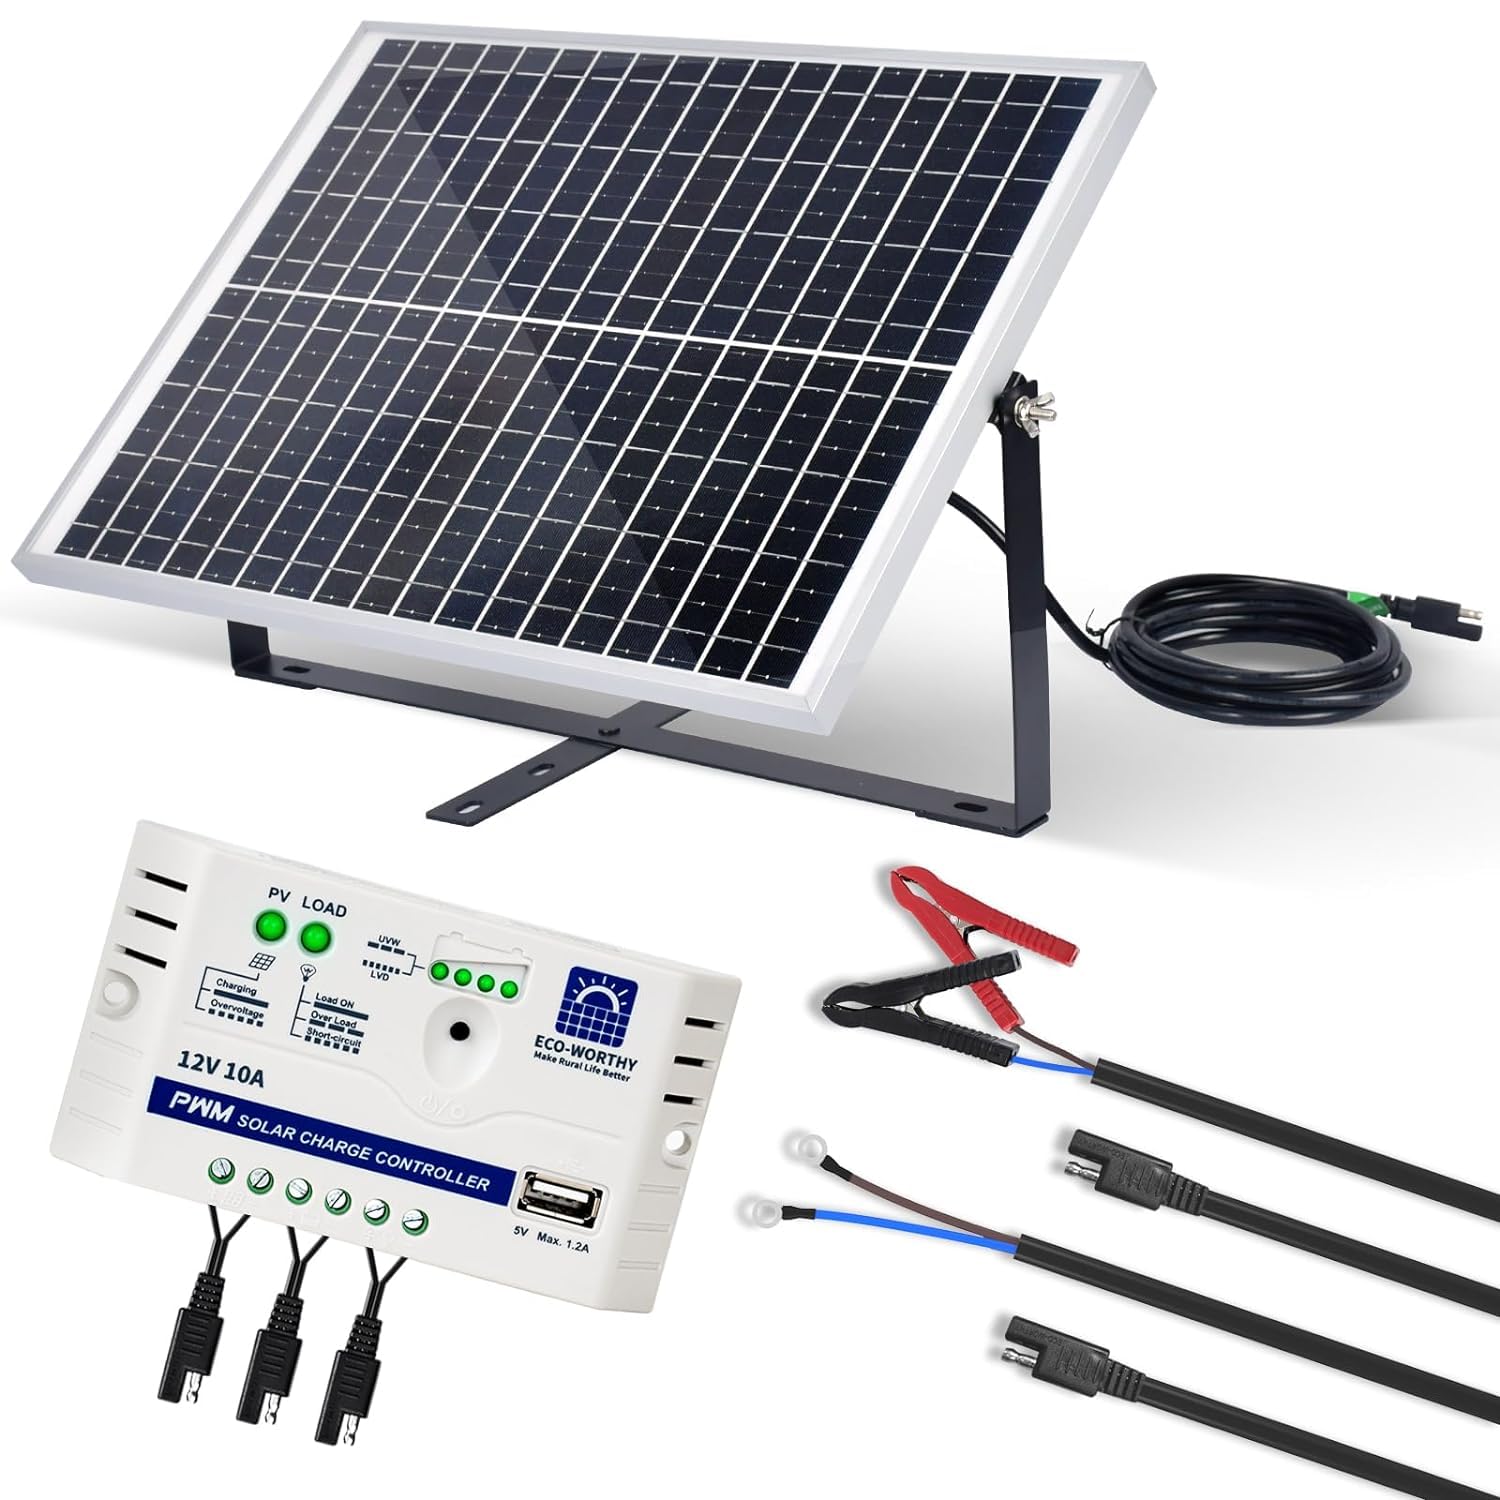 ECO-WORTHY 25W 12V Monokristallines Solarmodul Solarpanel Kit: 25W Solar Panel + Adjustable Mount Bracket + SAE Connection Cable +10A Charge Controller for Car RV Marine Boat